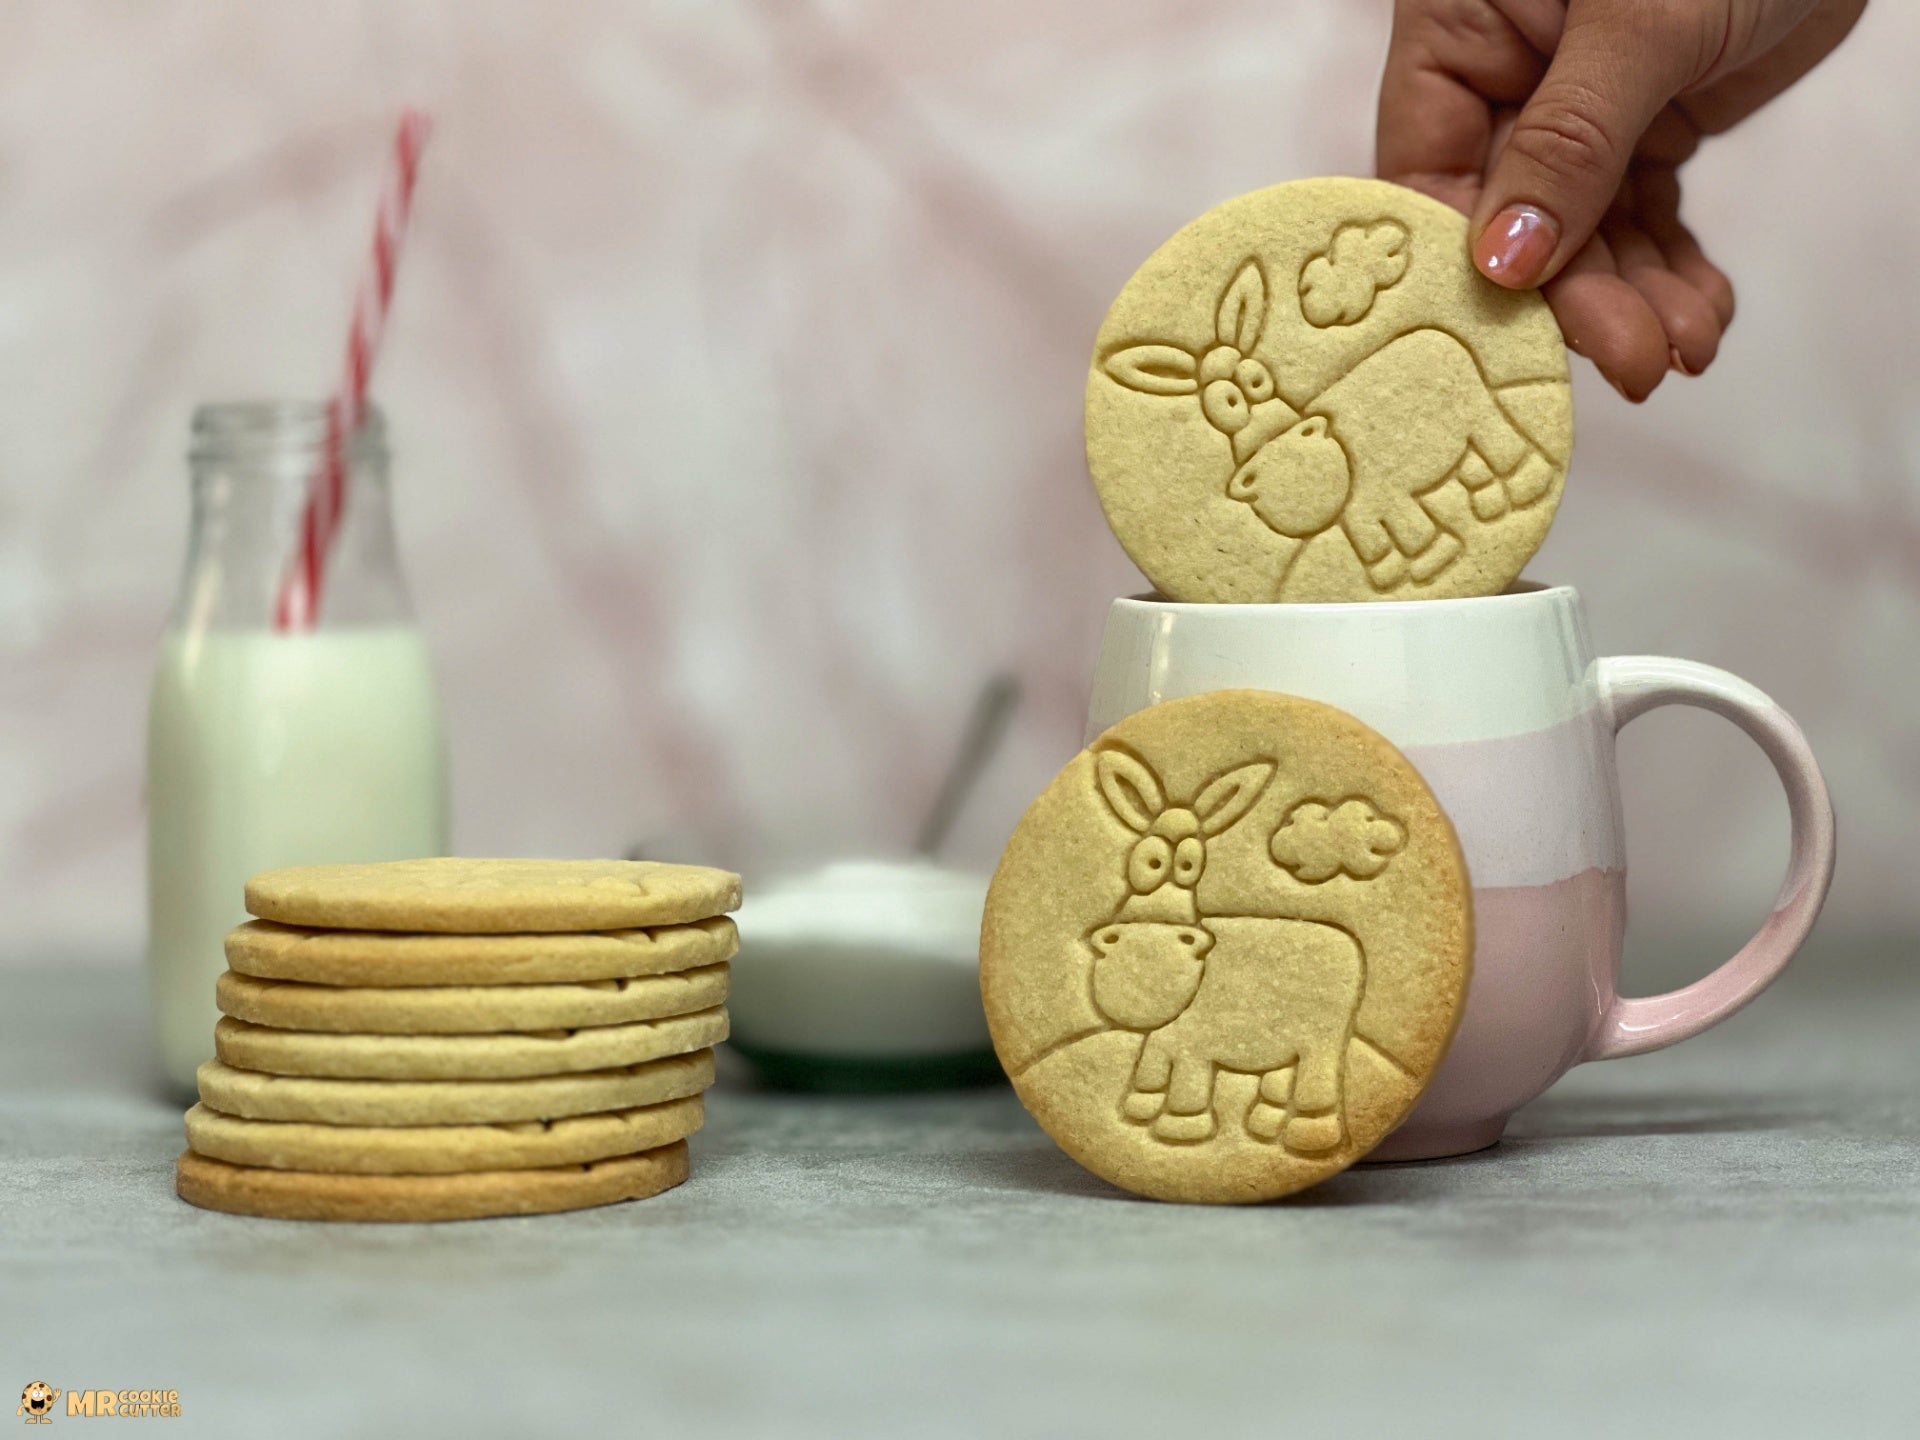 Donkey Cookie dipped in tea